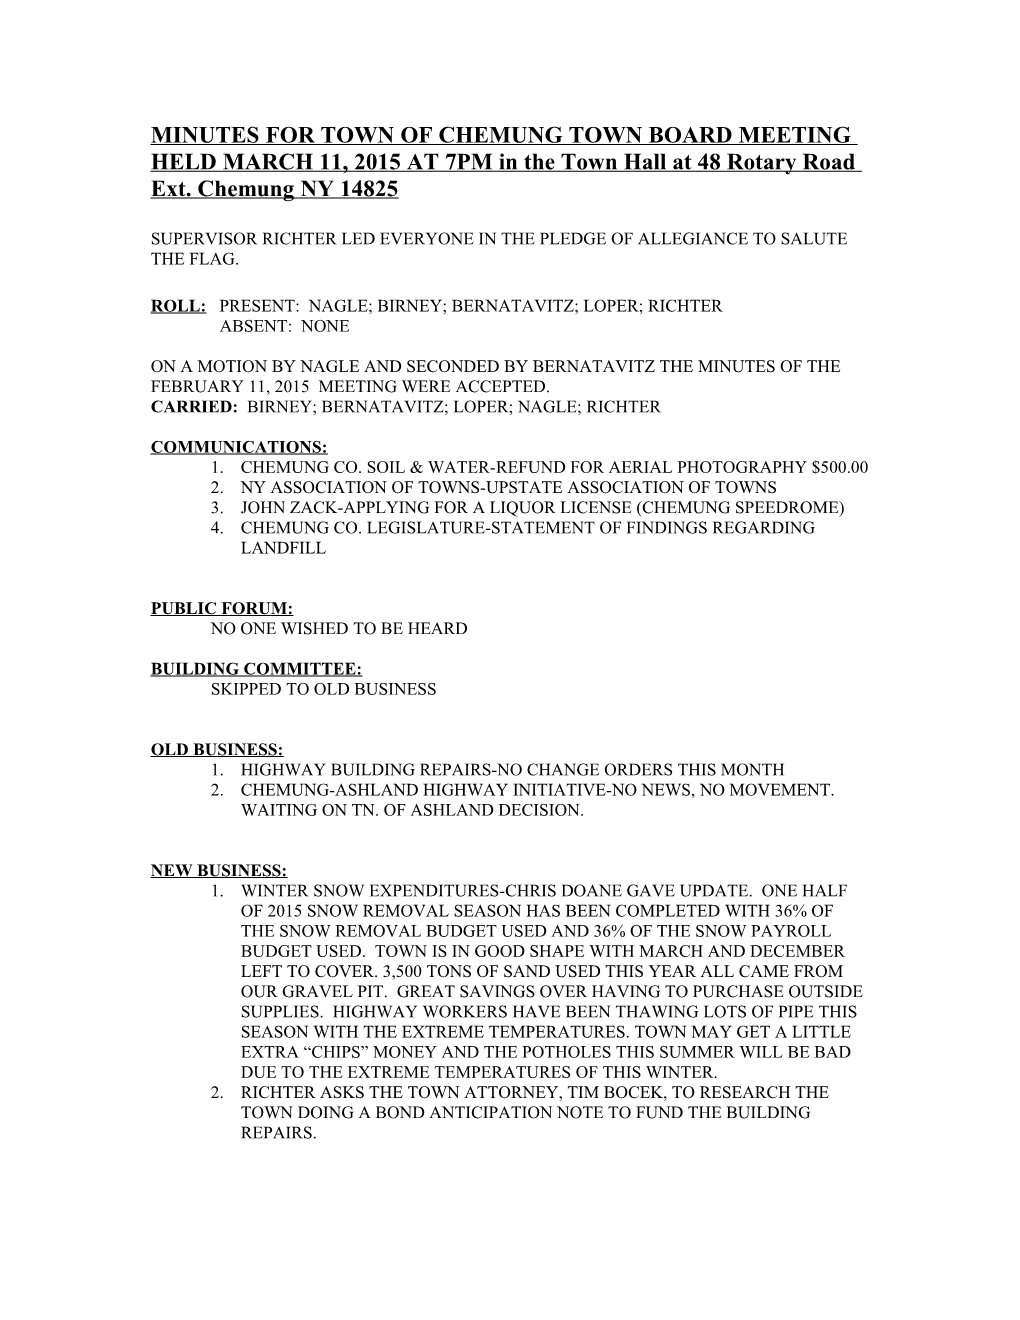 MINUTES for TOWN of CHEMUNG TOWN BOARD MEETING HELD on JULY 10, 2013 at 7PM in the Town s3